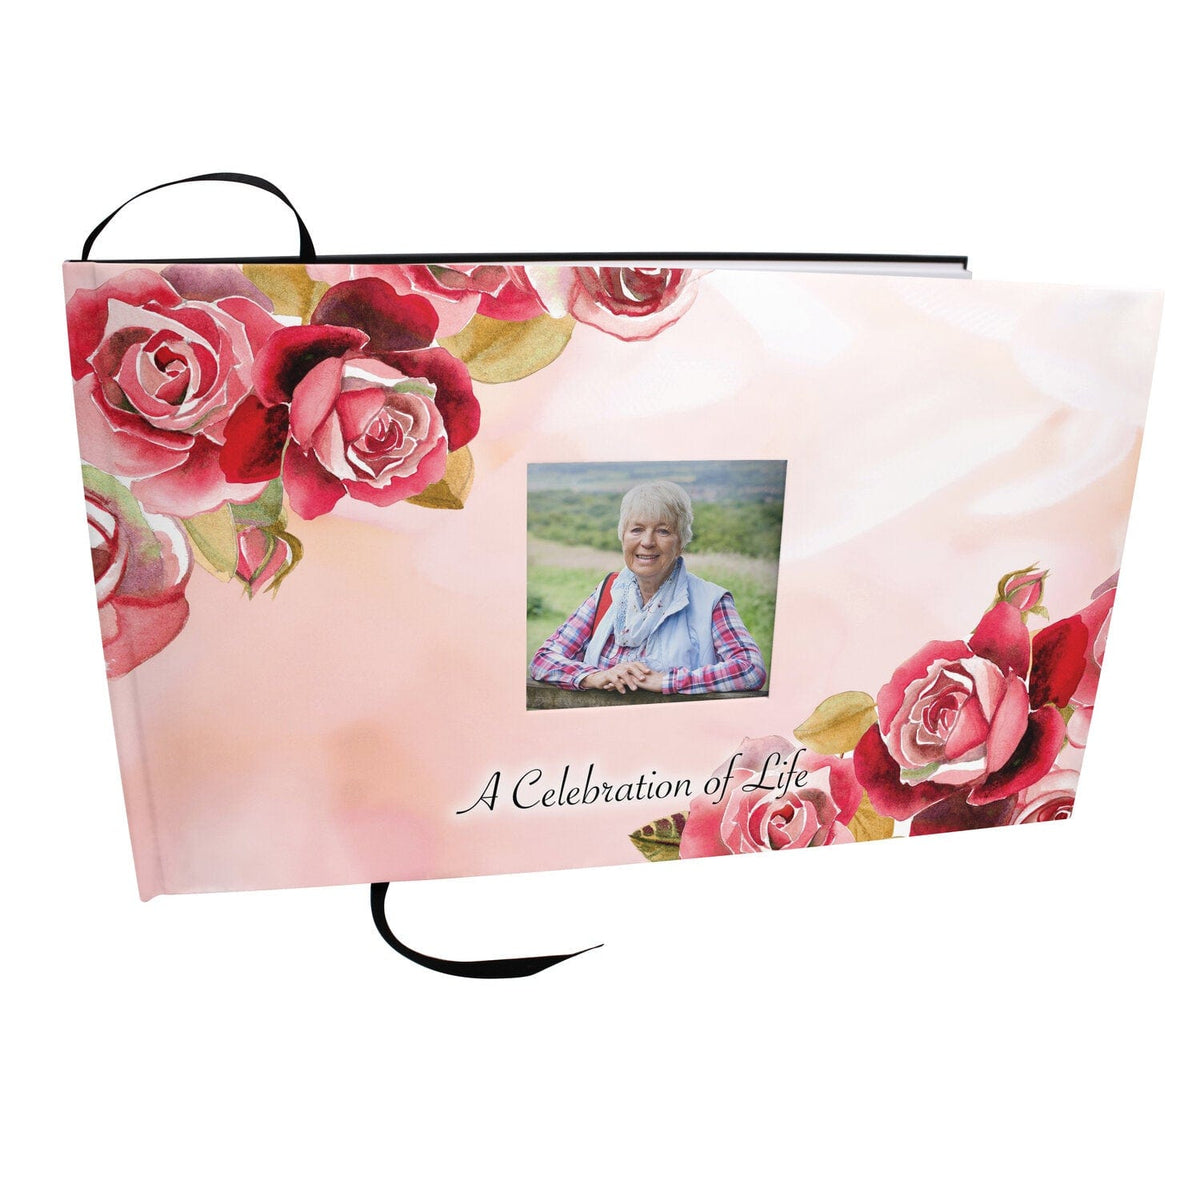 Commemorative Cremation Urns Home &amp; Garden Holy Roses Matching Themed &#39;Celebration of Life&#39; Guest Book for Funeral or Memorial Service